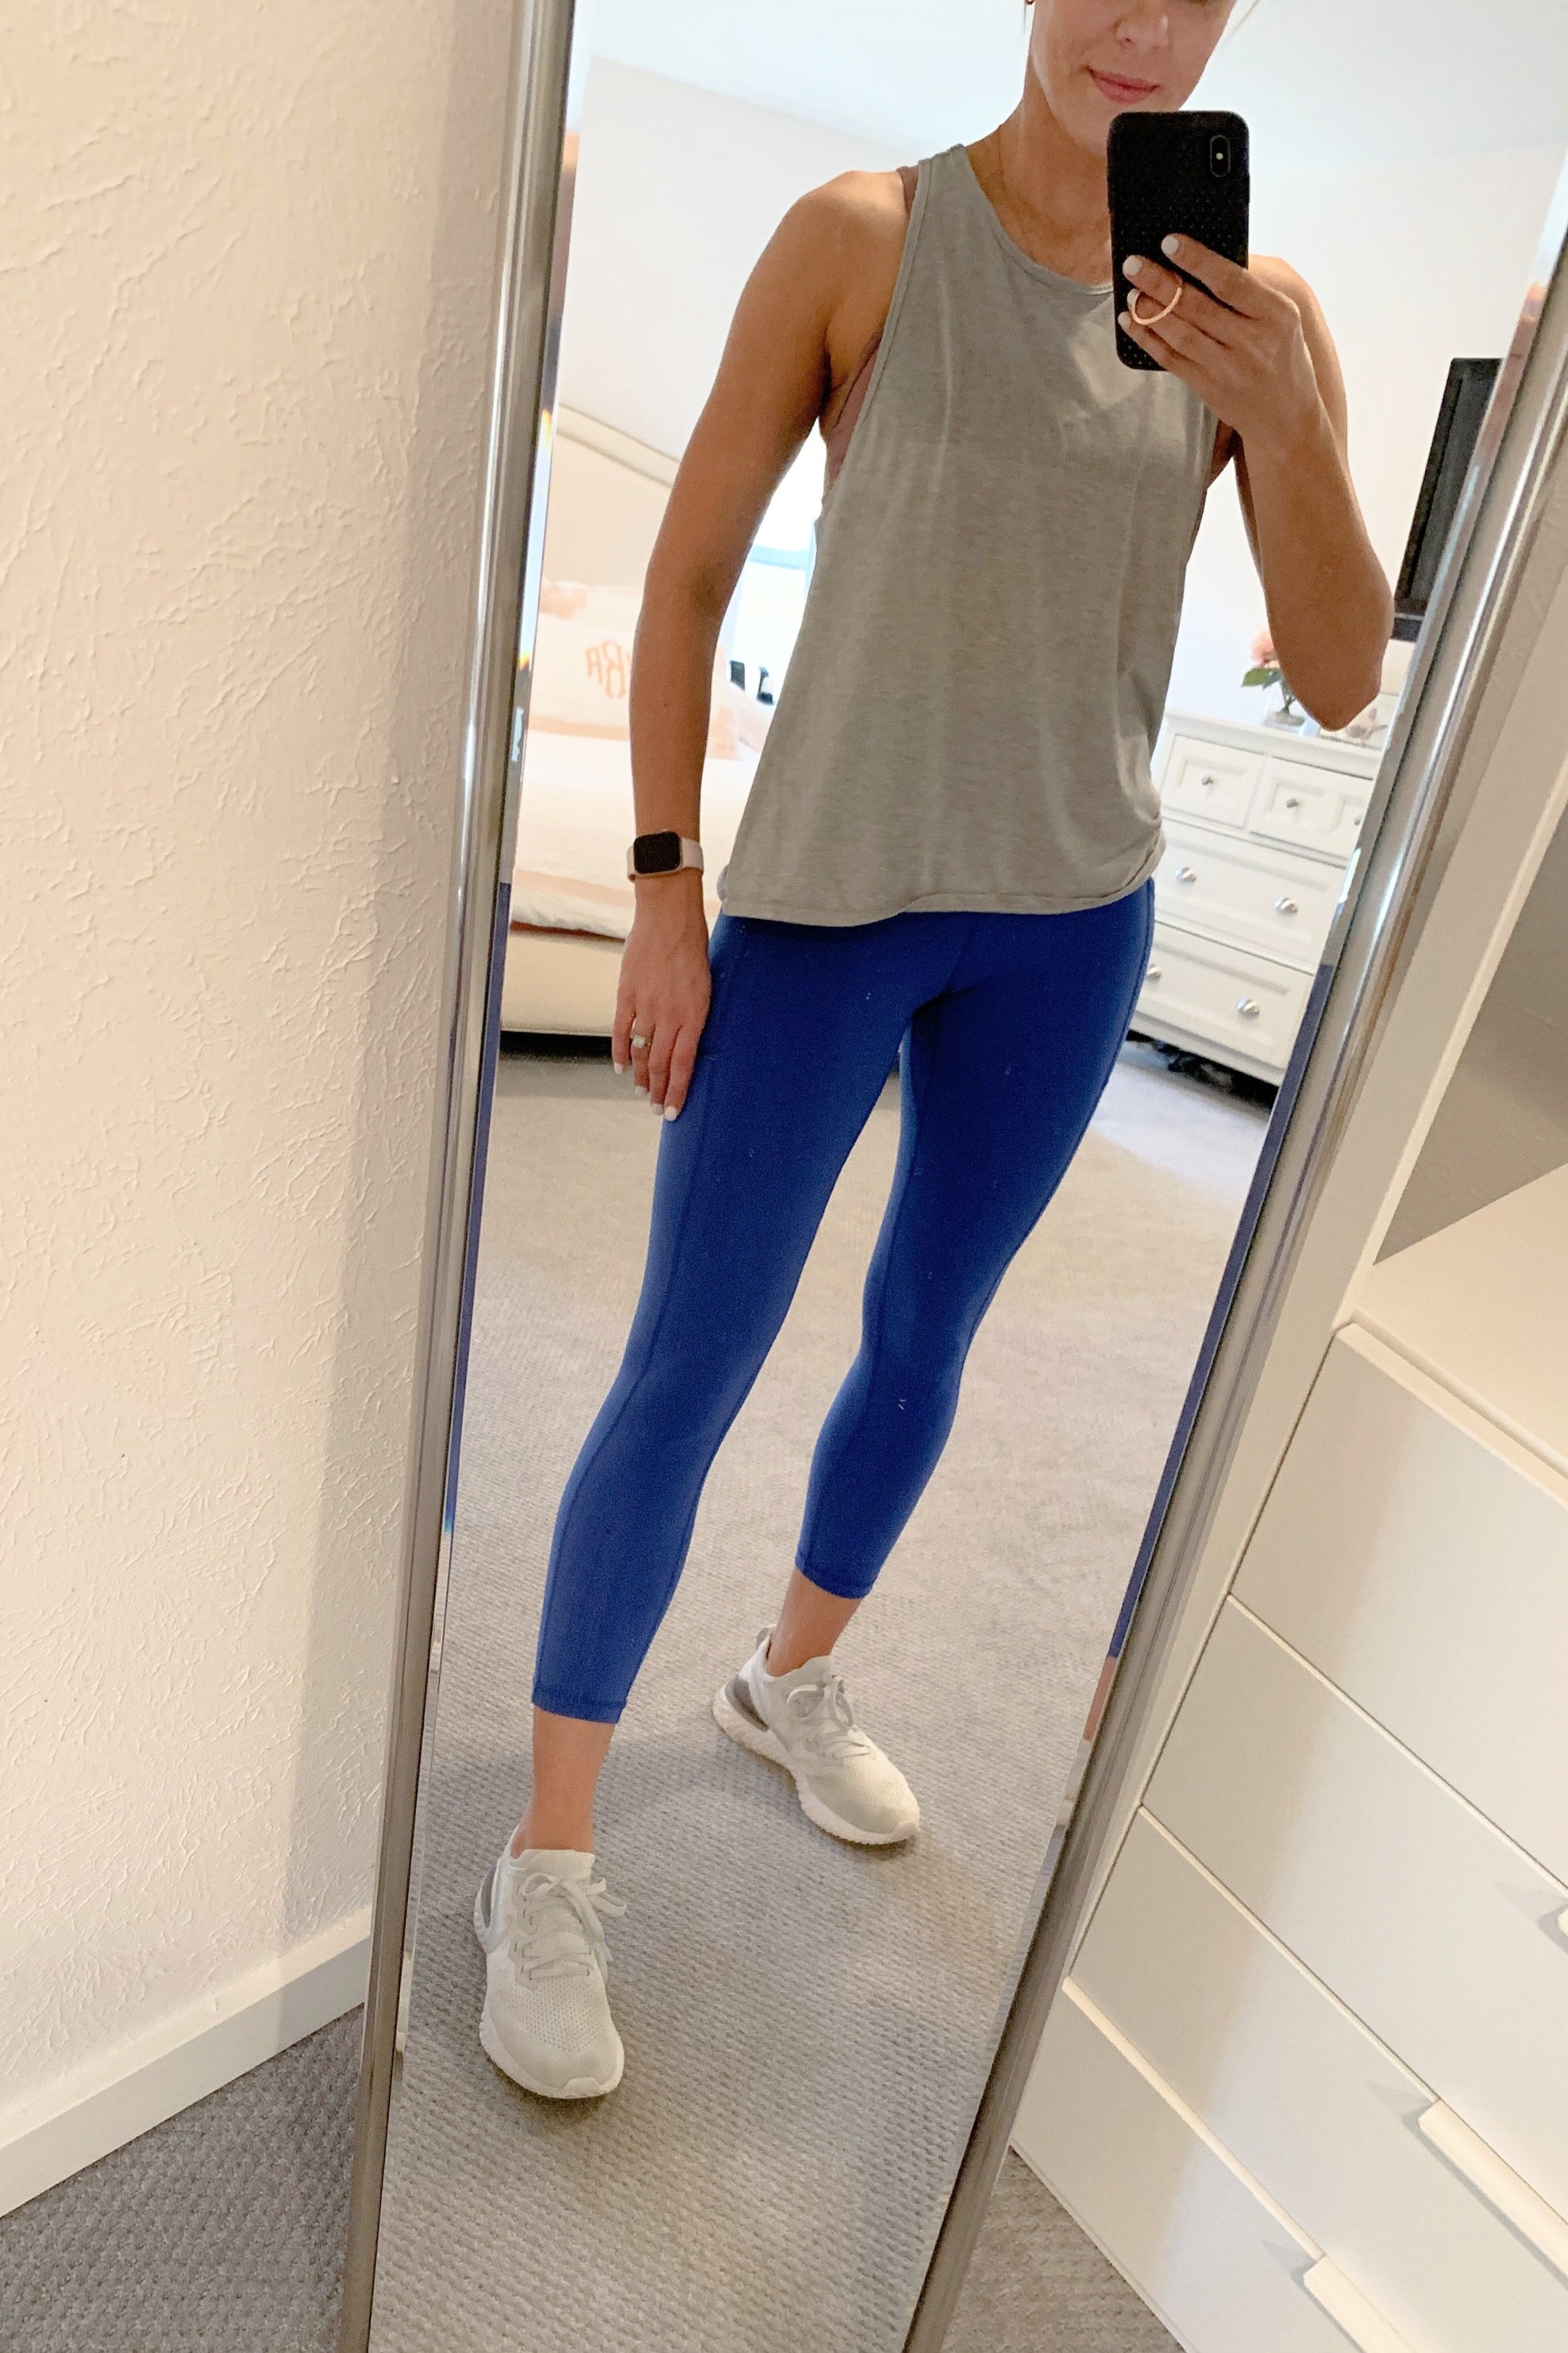 Legging Review — The Rose Record